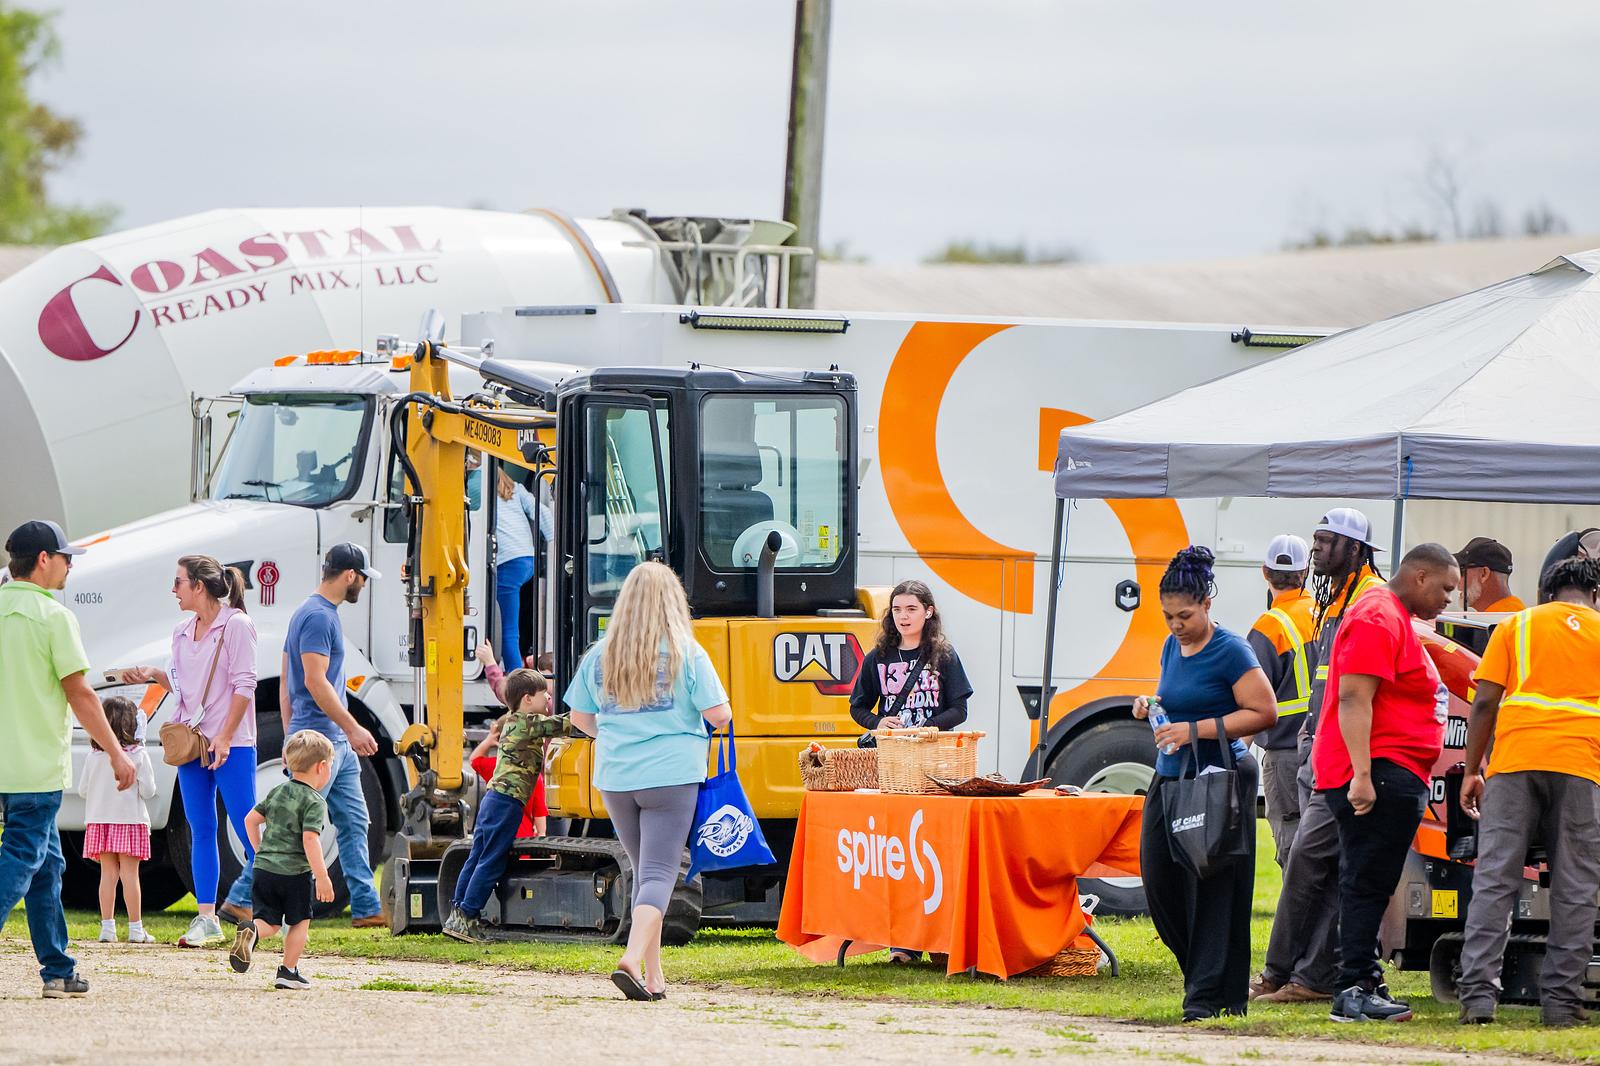 Image of event field. The Spire table and truck are on display.